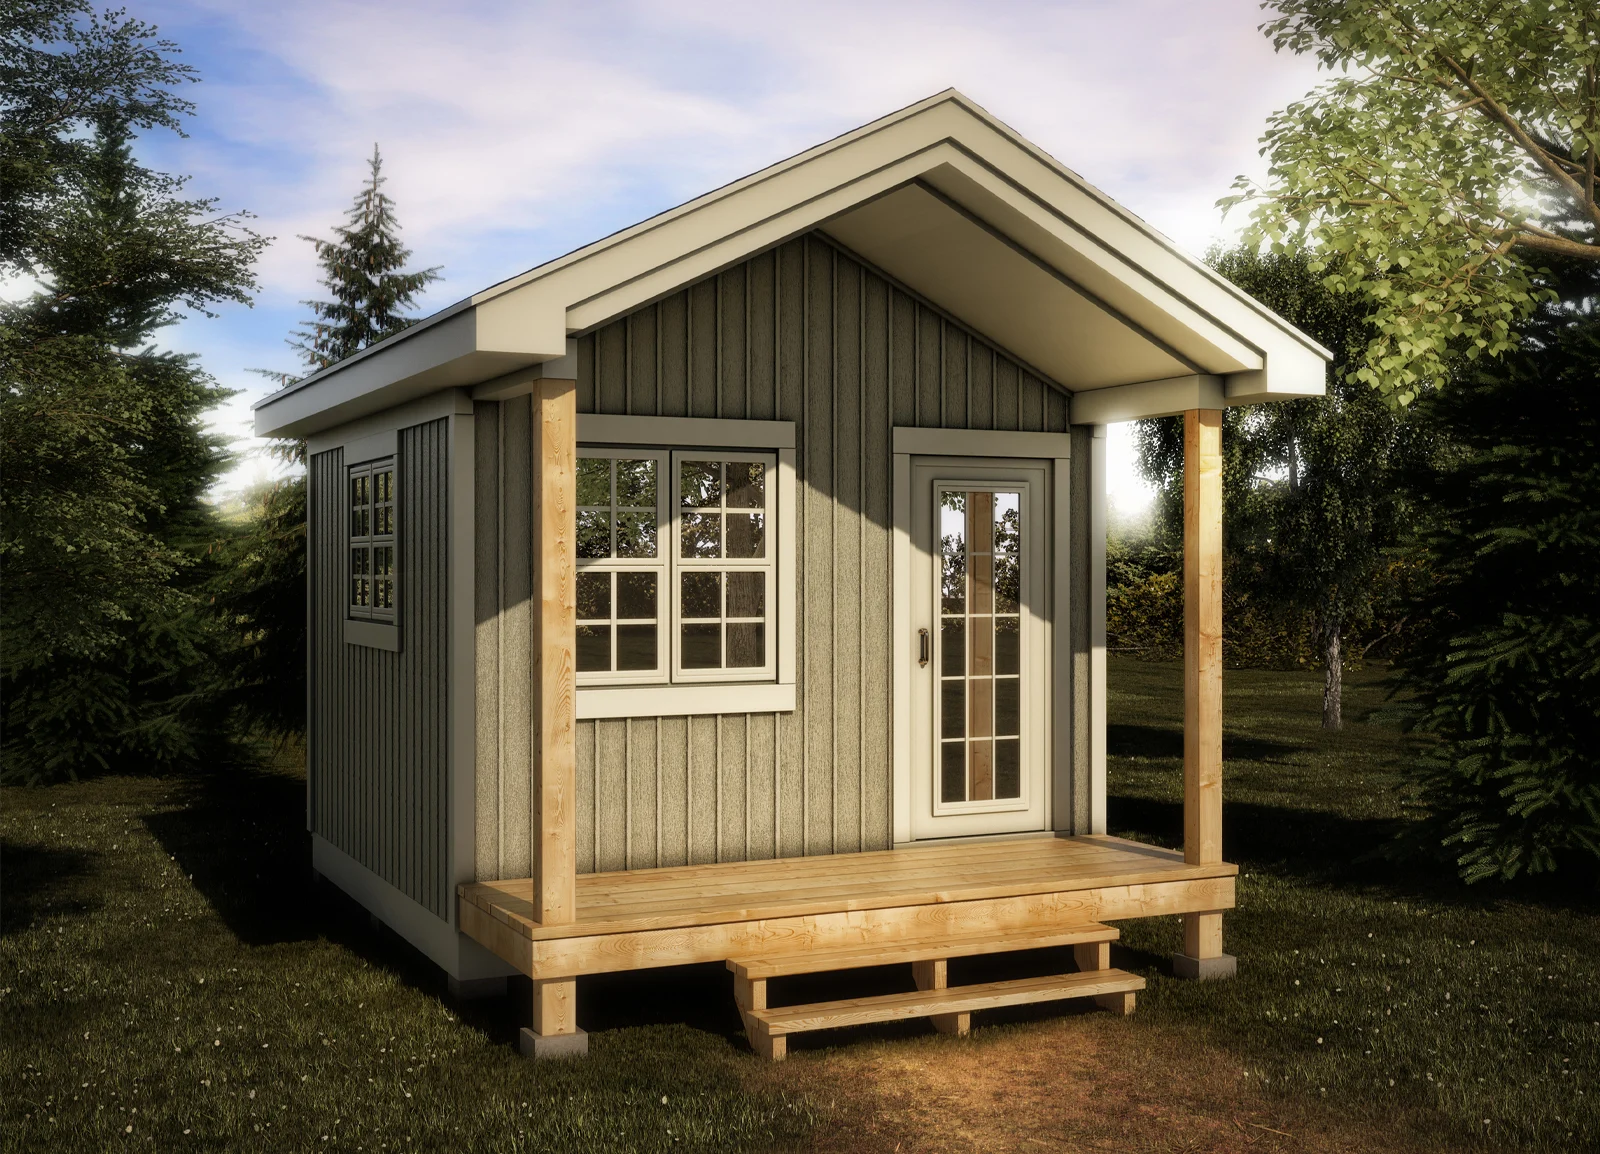 A bunkie shed